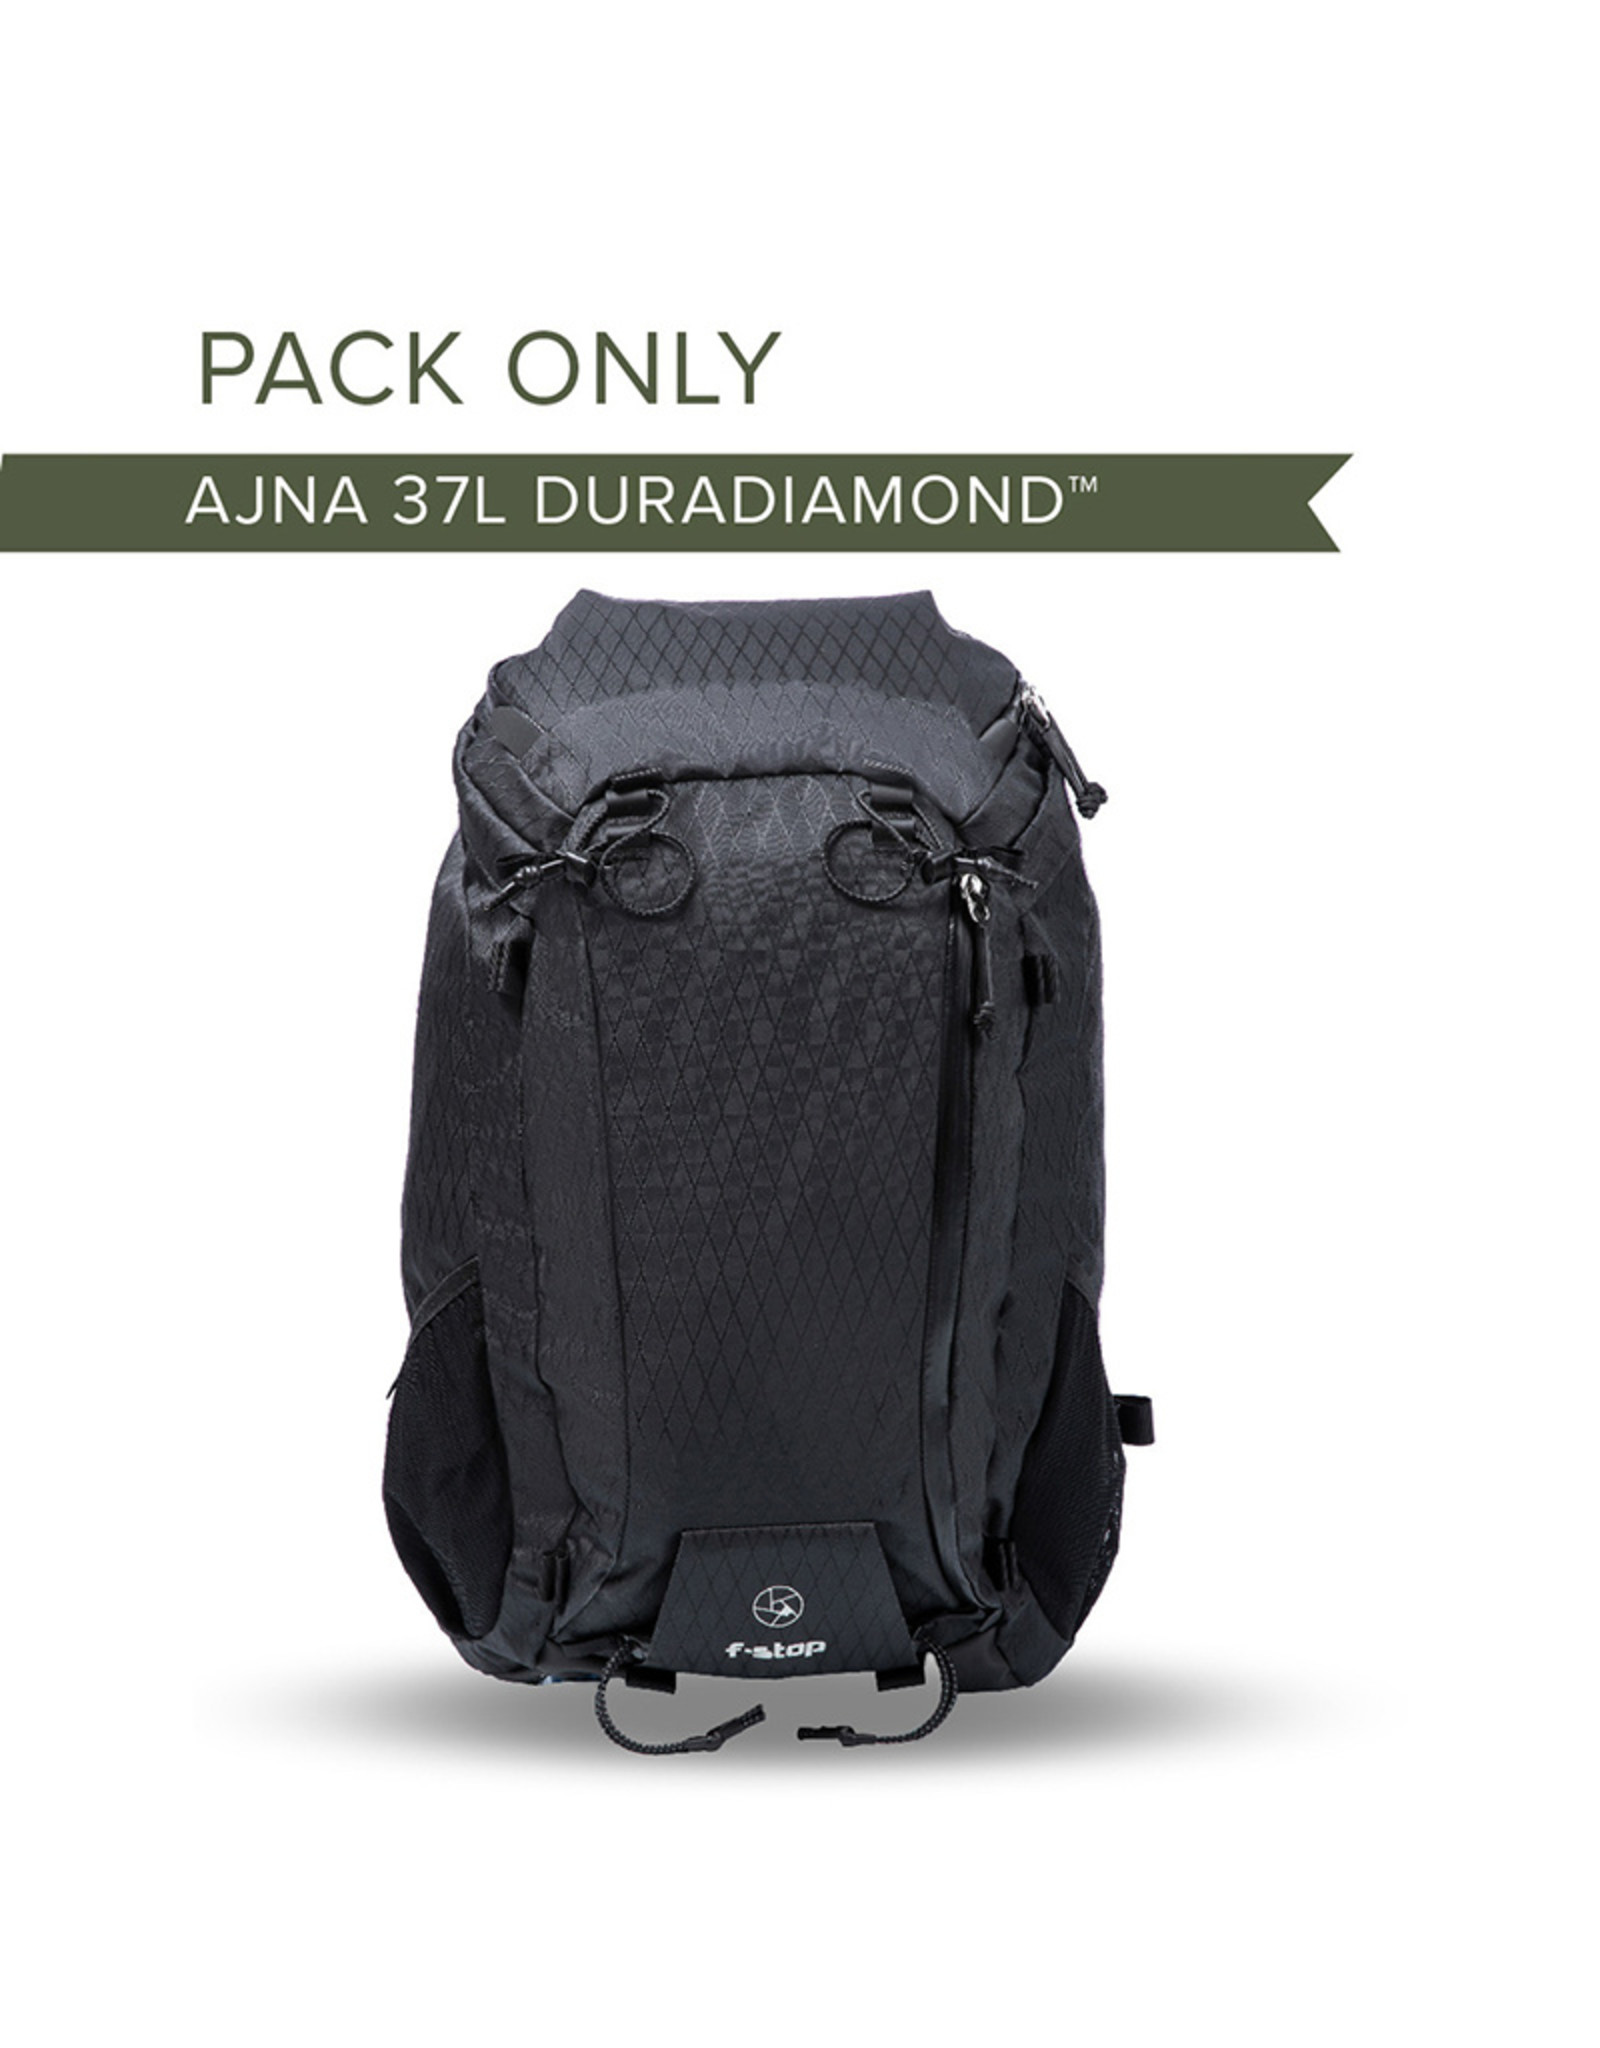 f-Stop f-Stop Ajna 37L Backpack - DuraDiamonds™ - backpack only, no insert